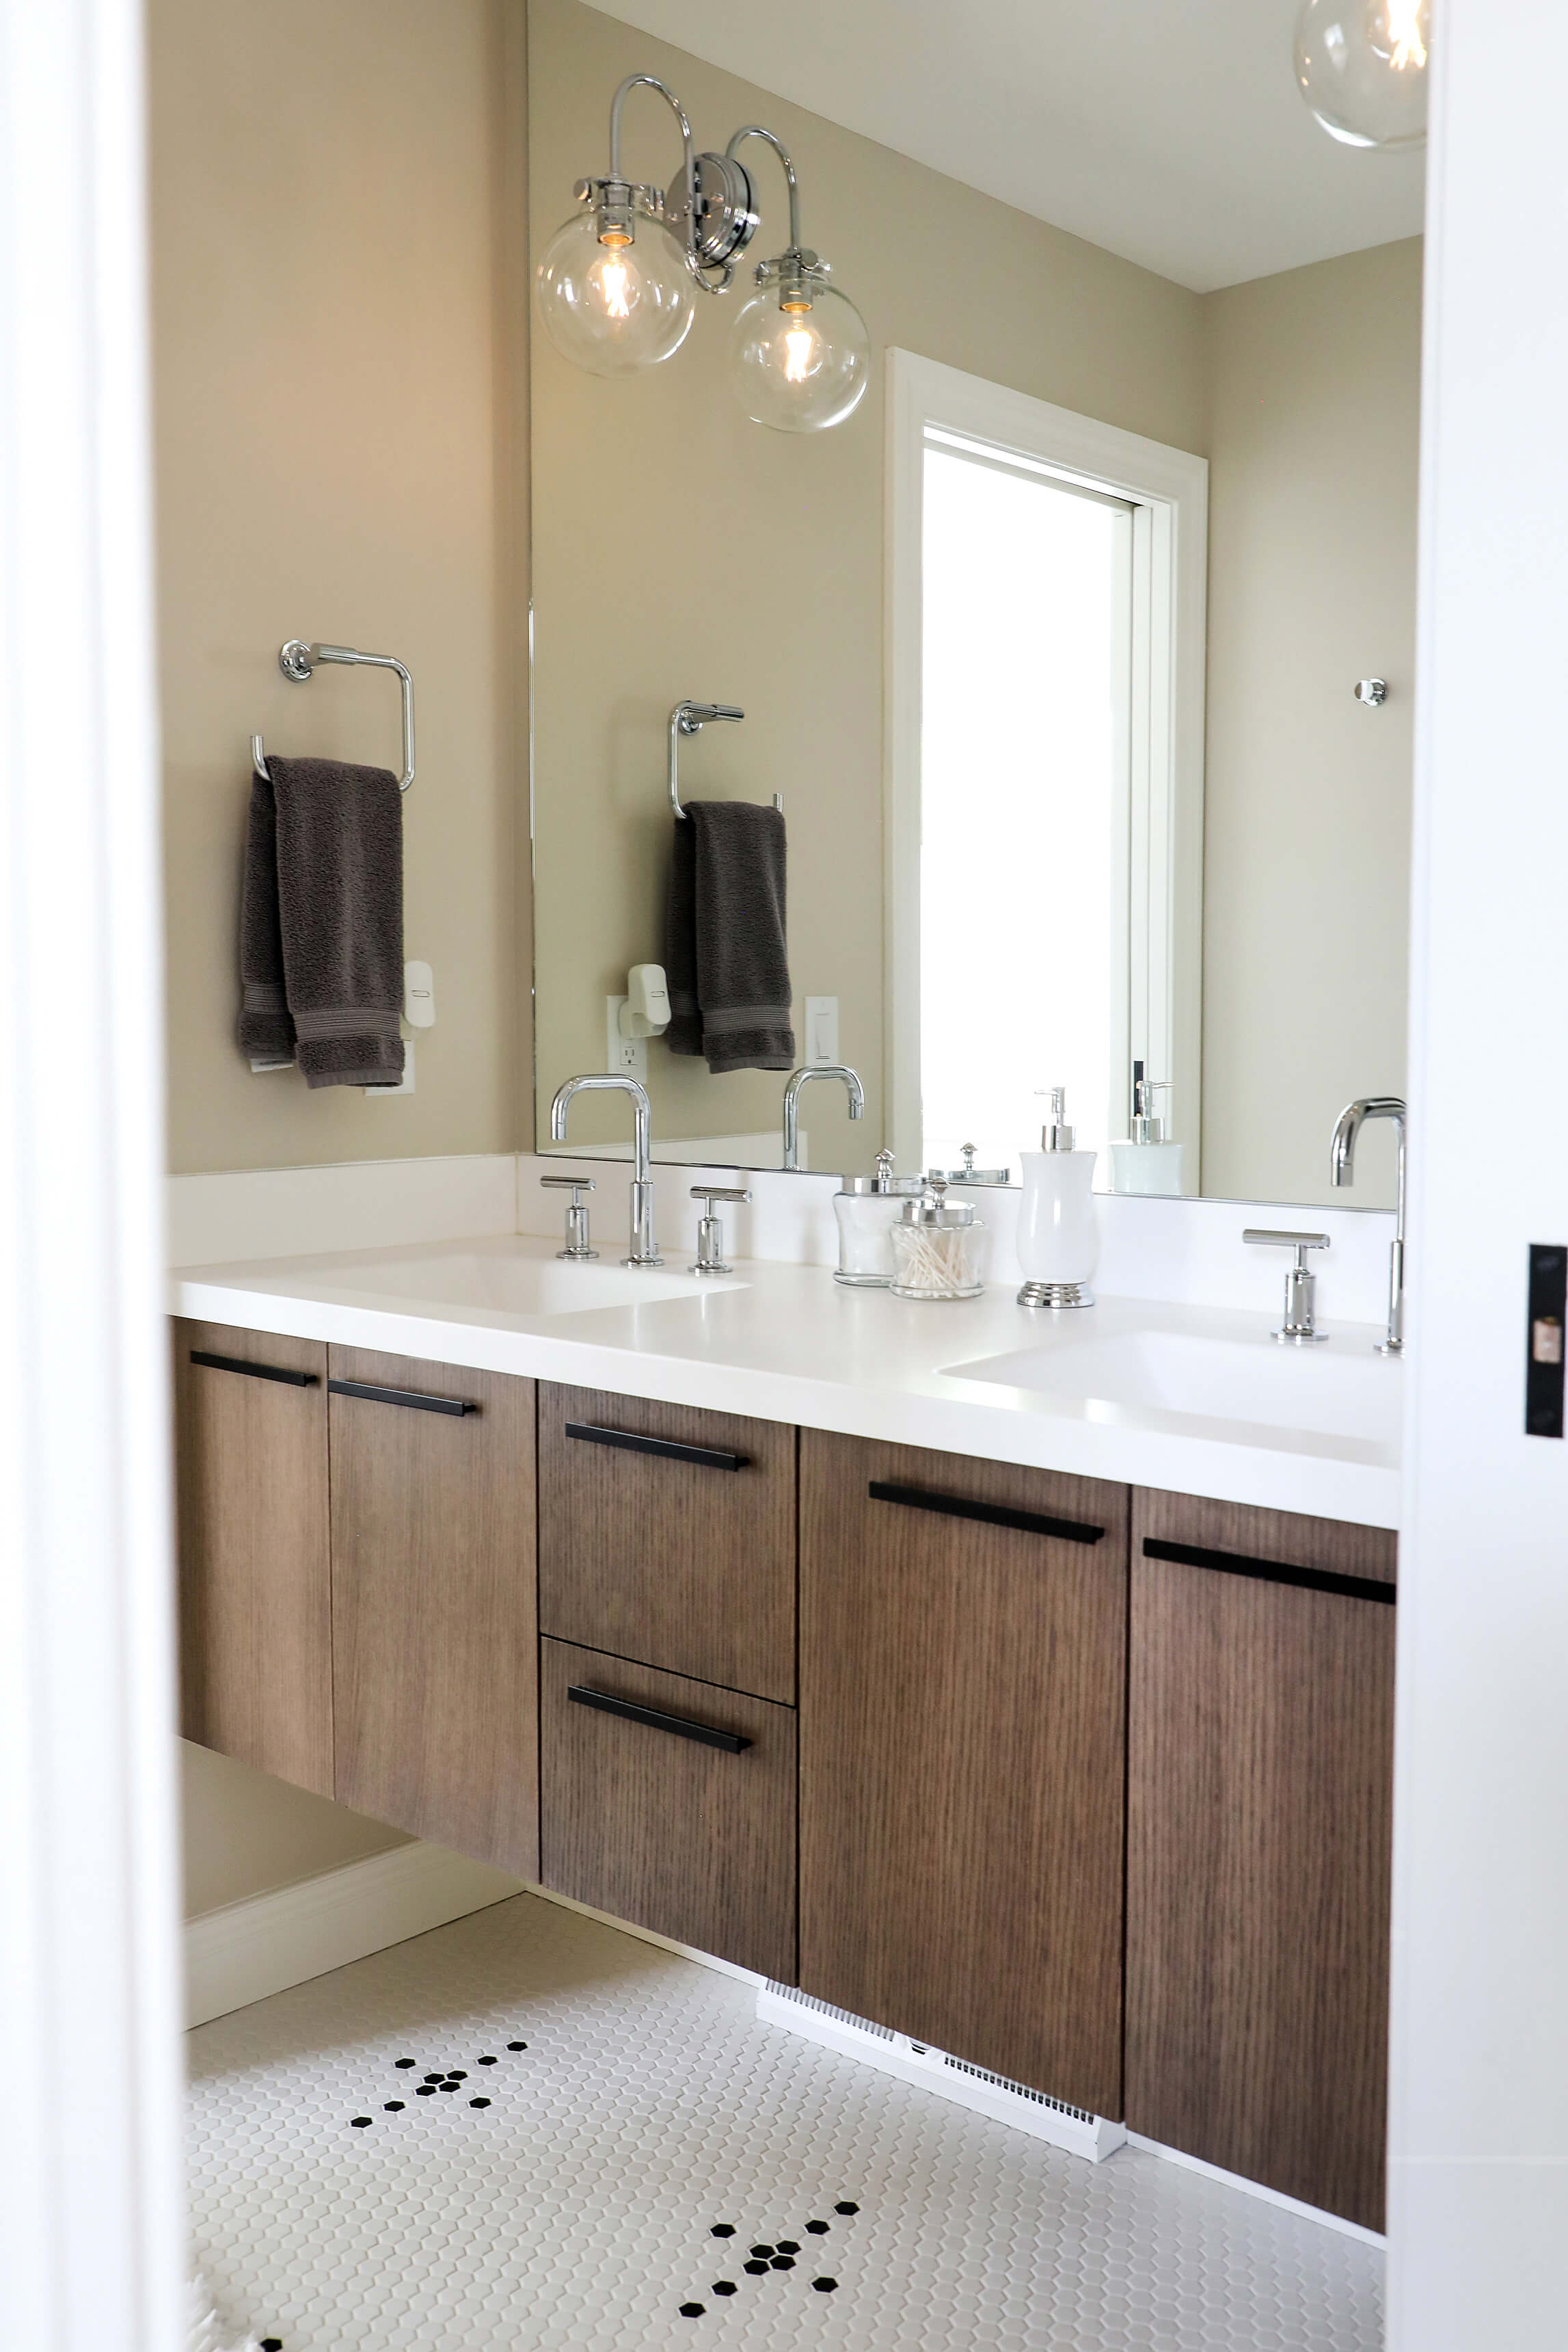 A textured wood floating vanity with a modern wood look. If you’re trying to create a refreshing spa-like environment you might be wishing you had a larger bathroom. If you can’t change the size of your bathroom, you can still make changes that will make it feel more expansive and luxurious.